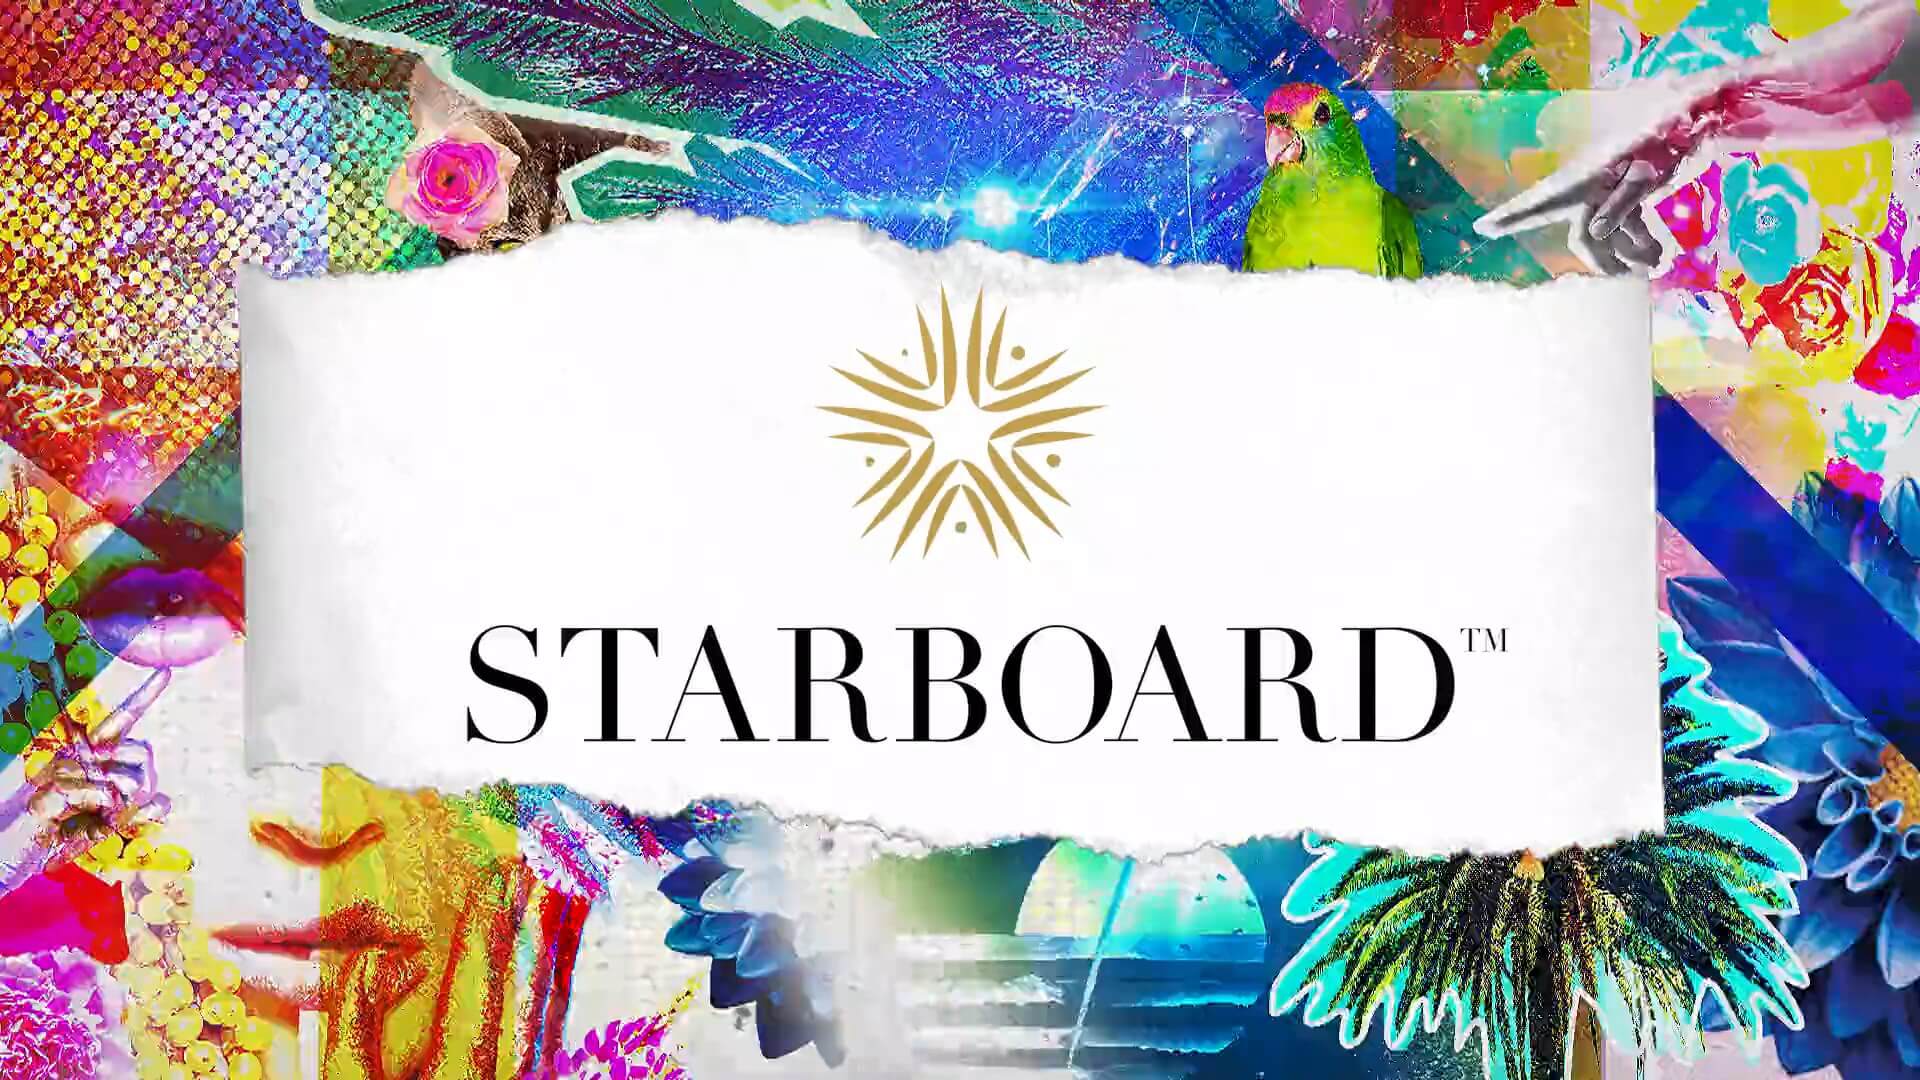 Starboard Cruise Services an LVMH Company - Louis Vuitton Moet